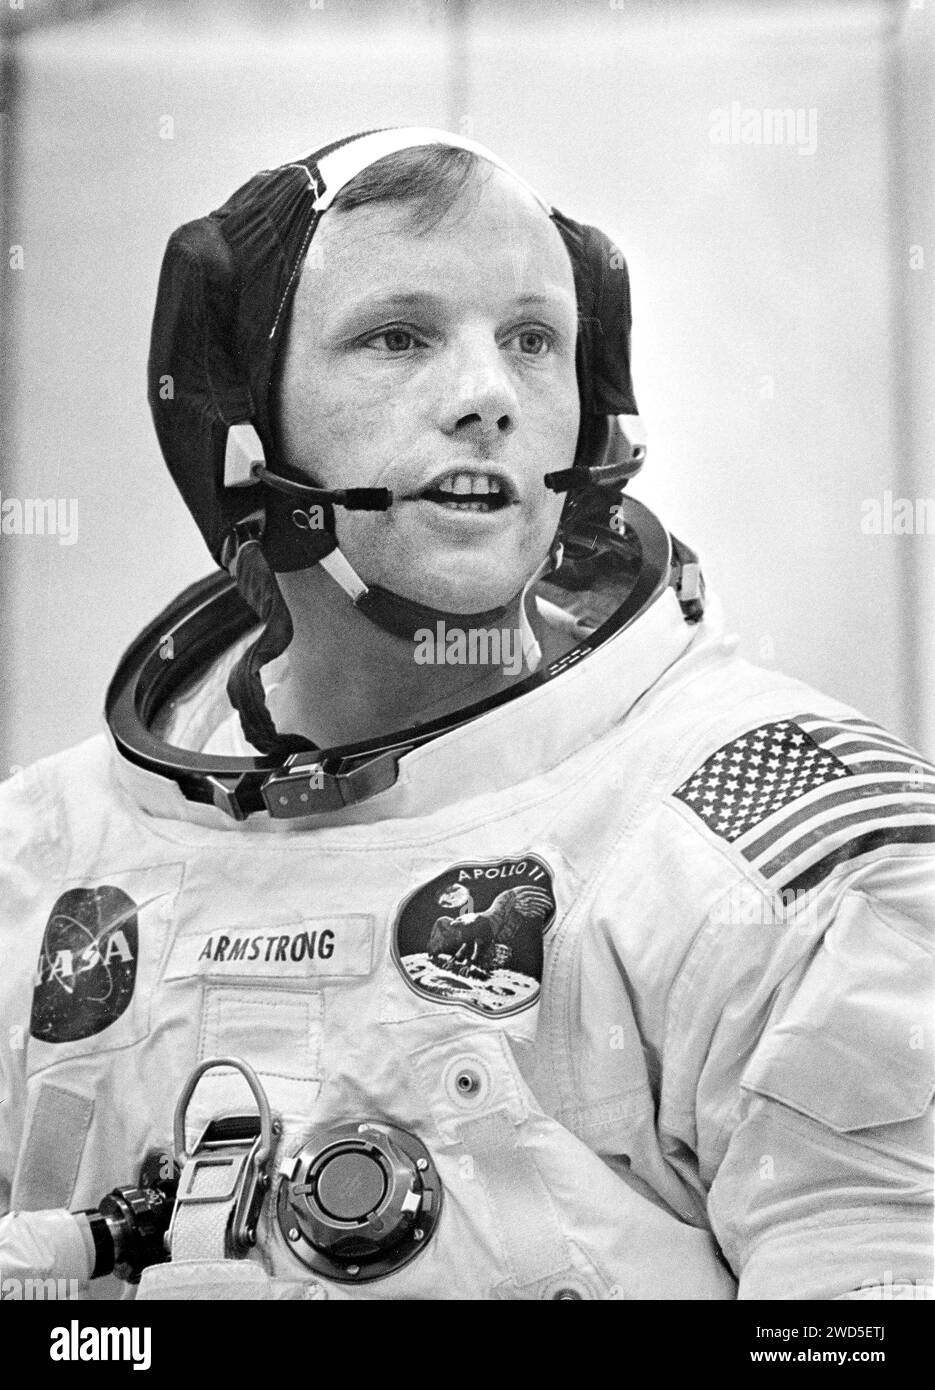 Mission commander Neil A. Armstrong conducting final check of his communications system before boarding of the Apollo 11 mission, the first manned lunar mission, Kennedy Space Center, Florida, USA, NASA, July 16, 1969 Stock Photo